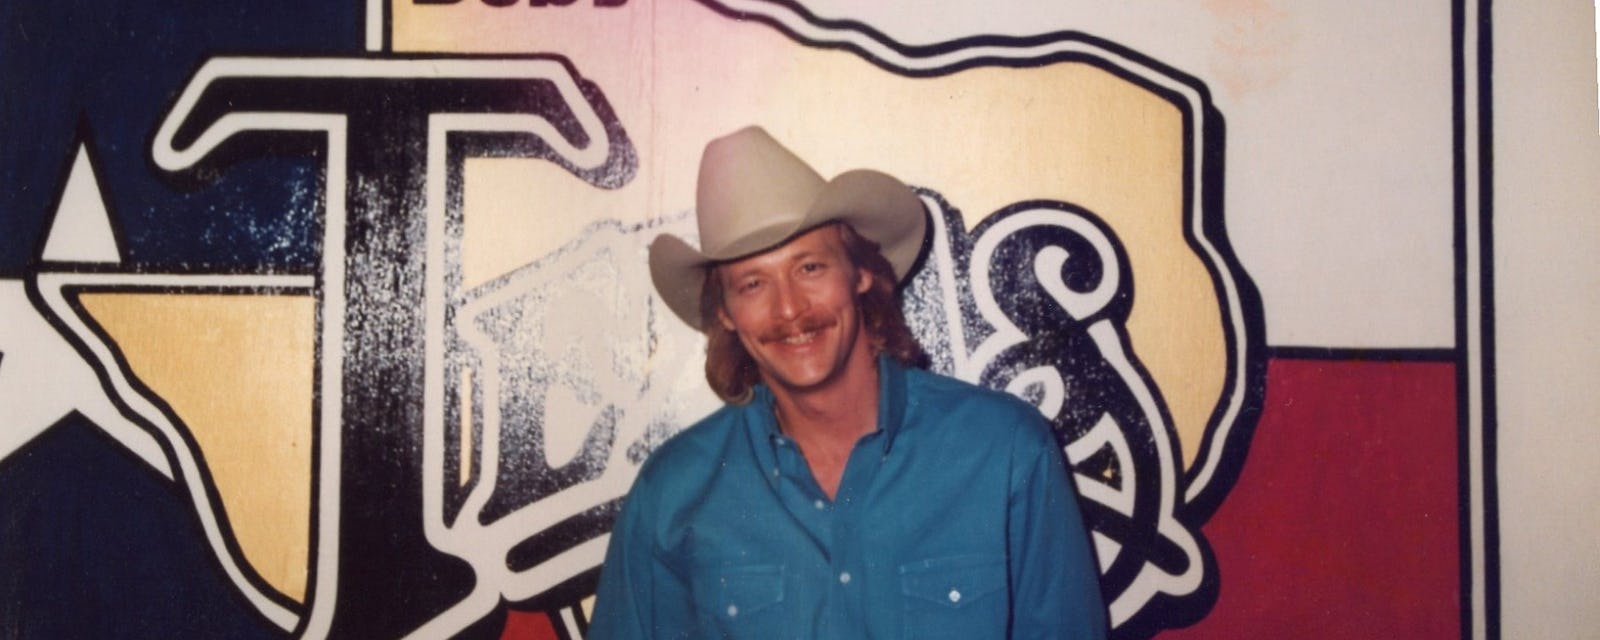 Alan Jackson Says 'Country Music Is Gone,' and He's Not Happy